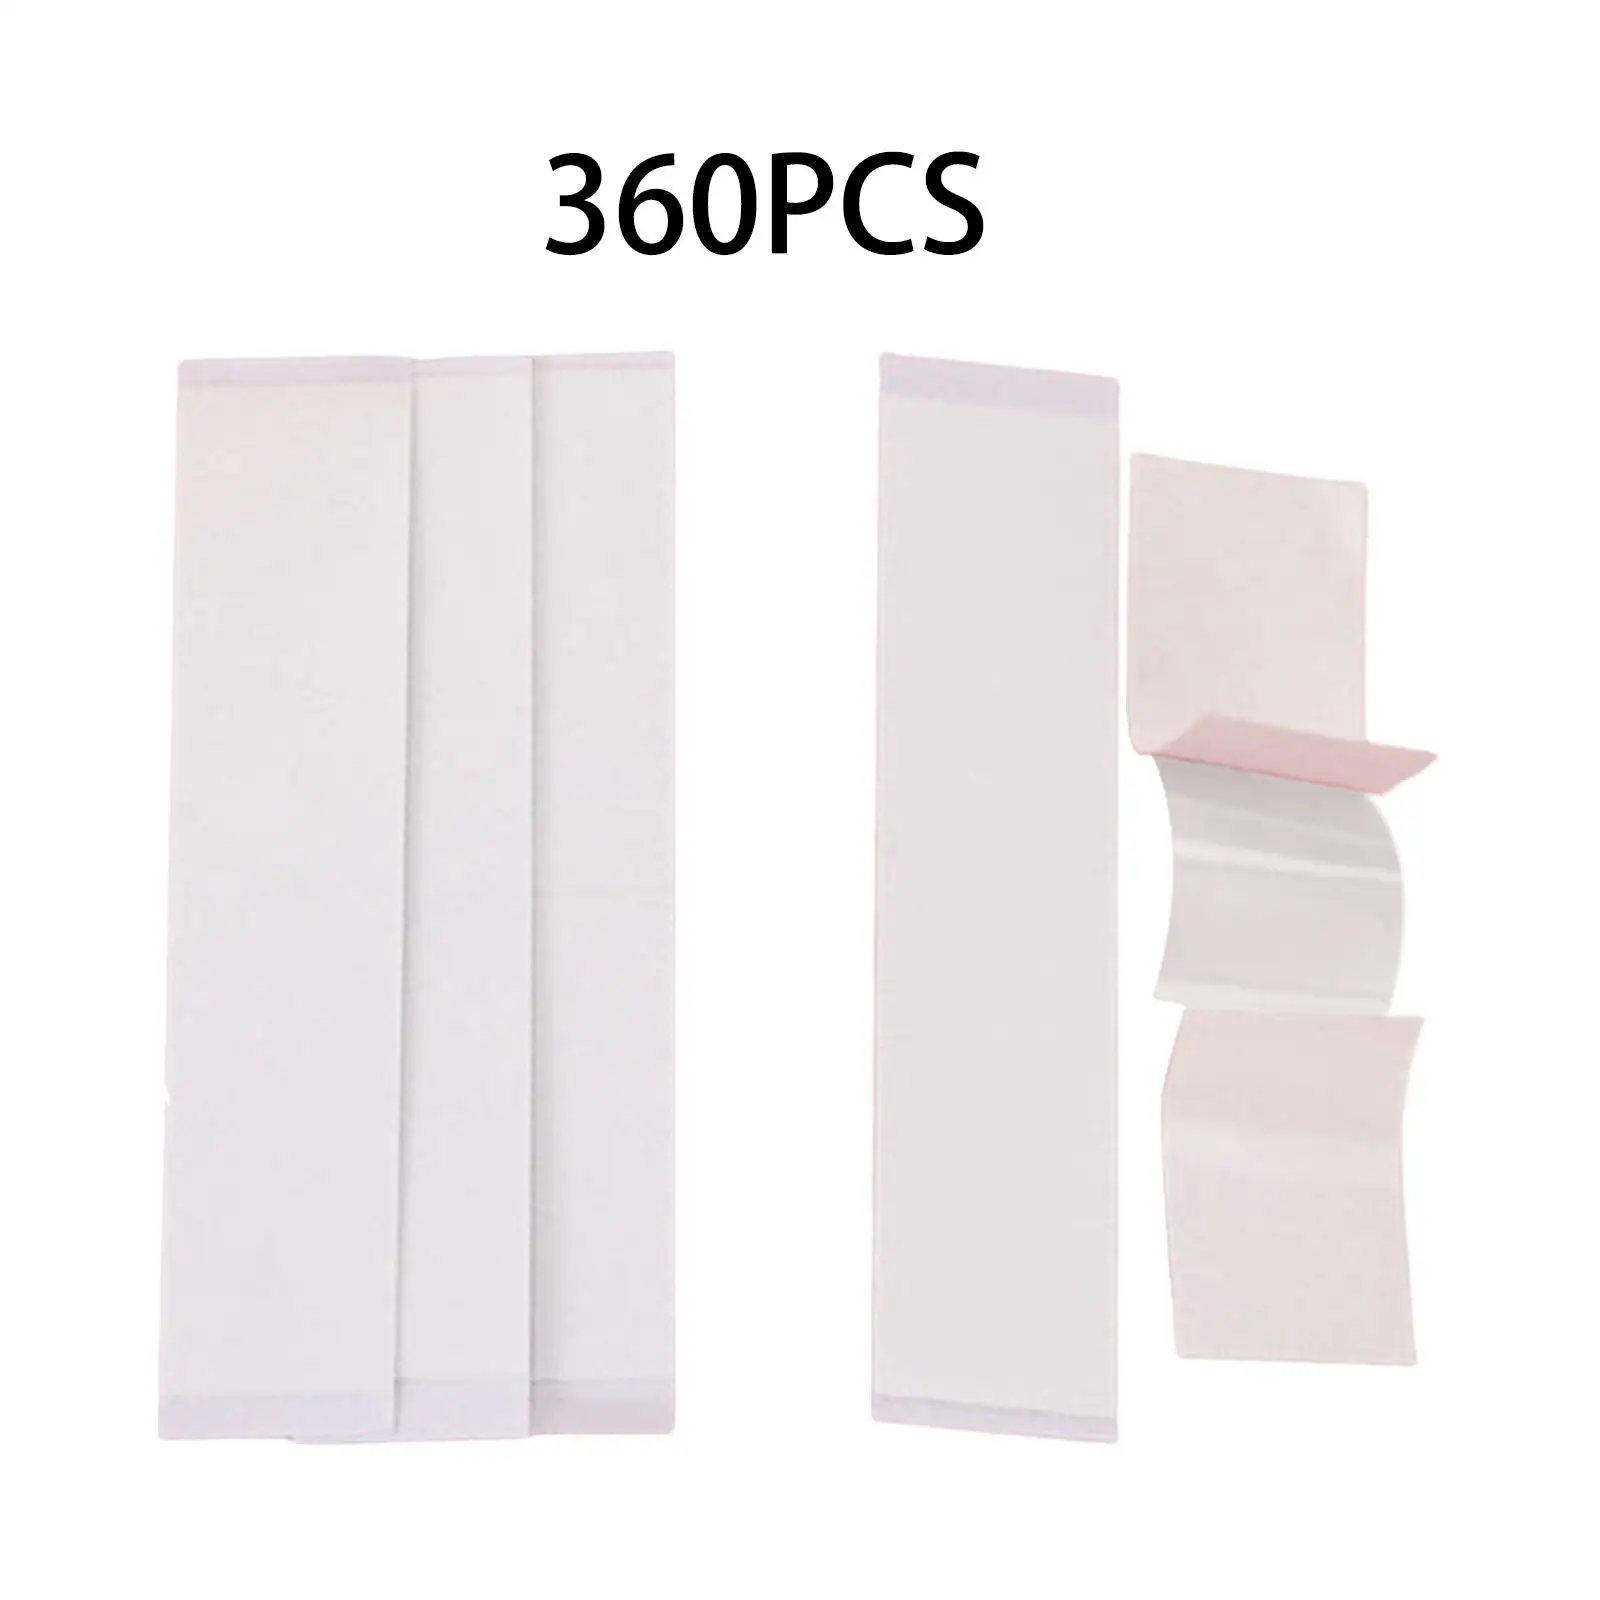 360 Pieces Transparent Clear for Skin Body Tape for Skin for Dresses All Fabric Types Bra Shoulder Straps Clothes